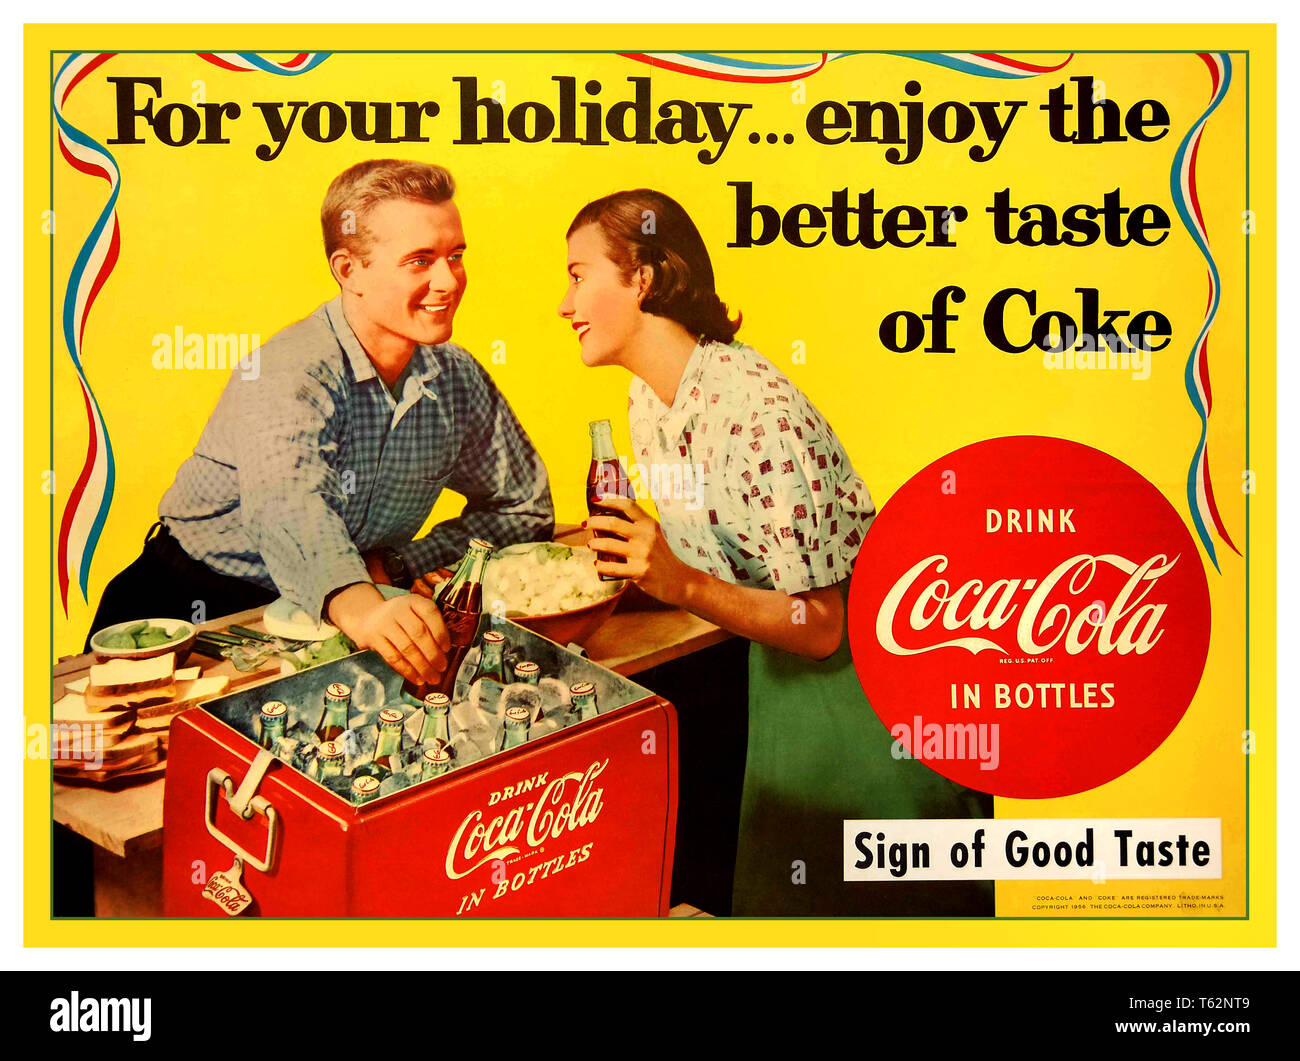 Vintage 1950's Coca Cola poster advertisement ' For Your Holiday ... enjoy the better taste of Coke' Stock Photo